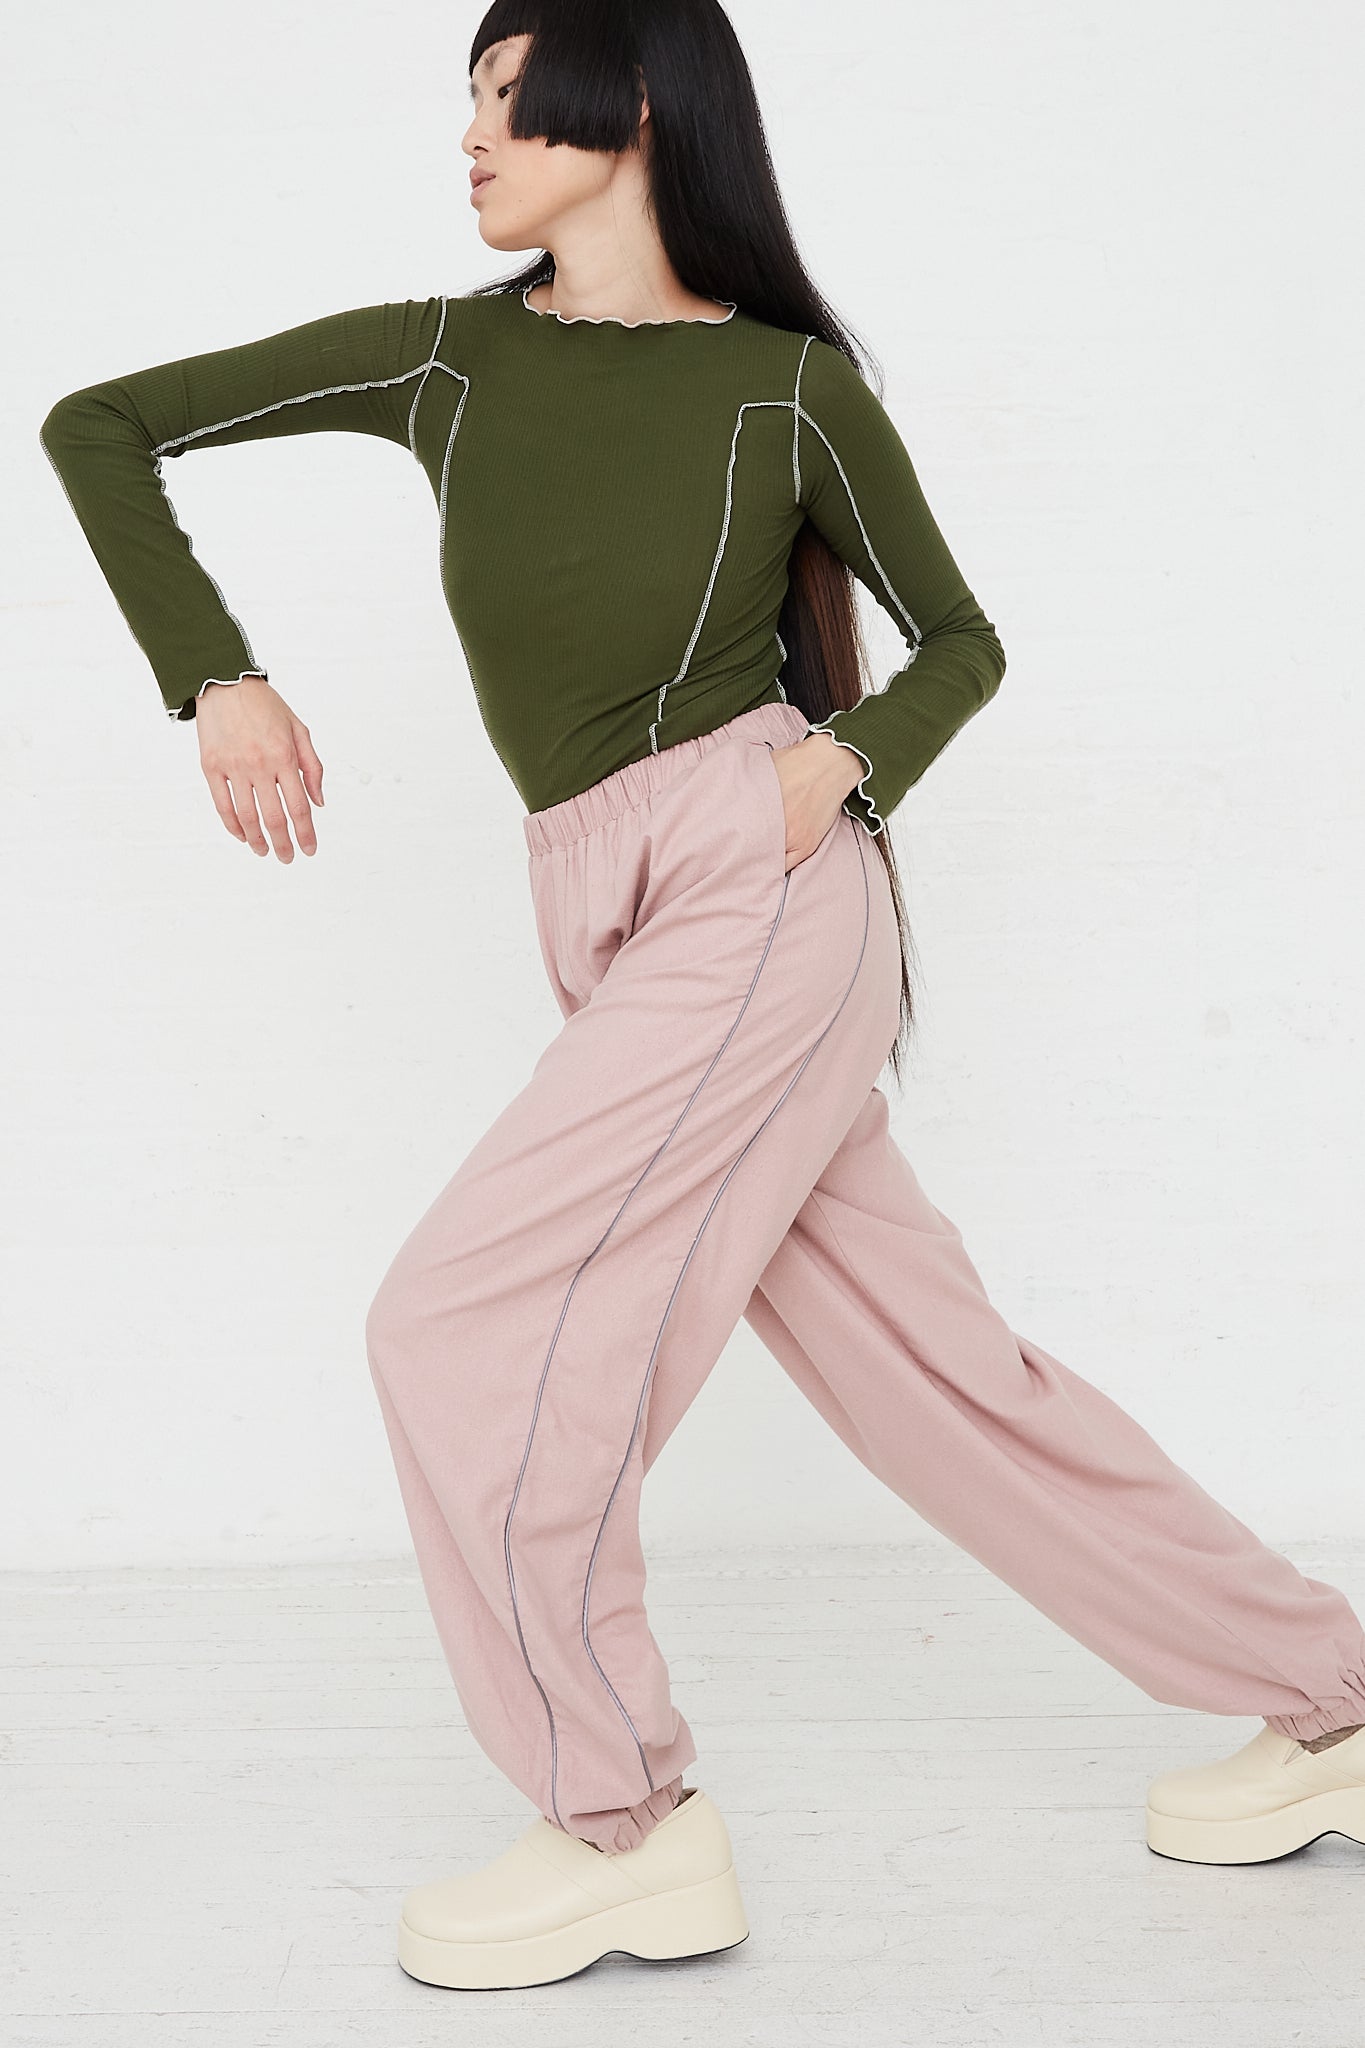 Lesie High Waist Pant in Pompei Rose by Baserange for Oroboro Front Sideview